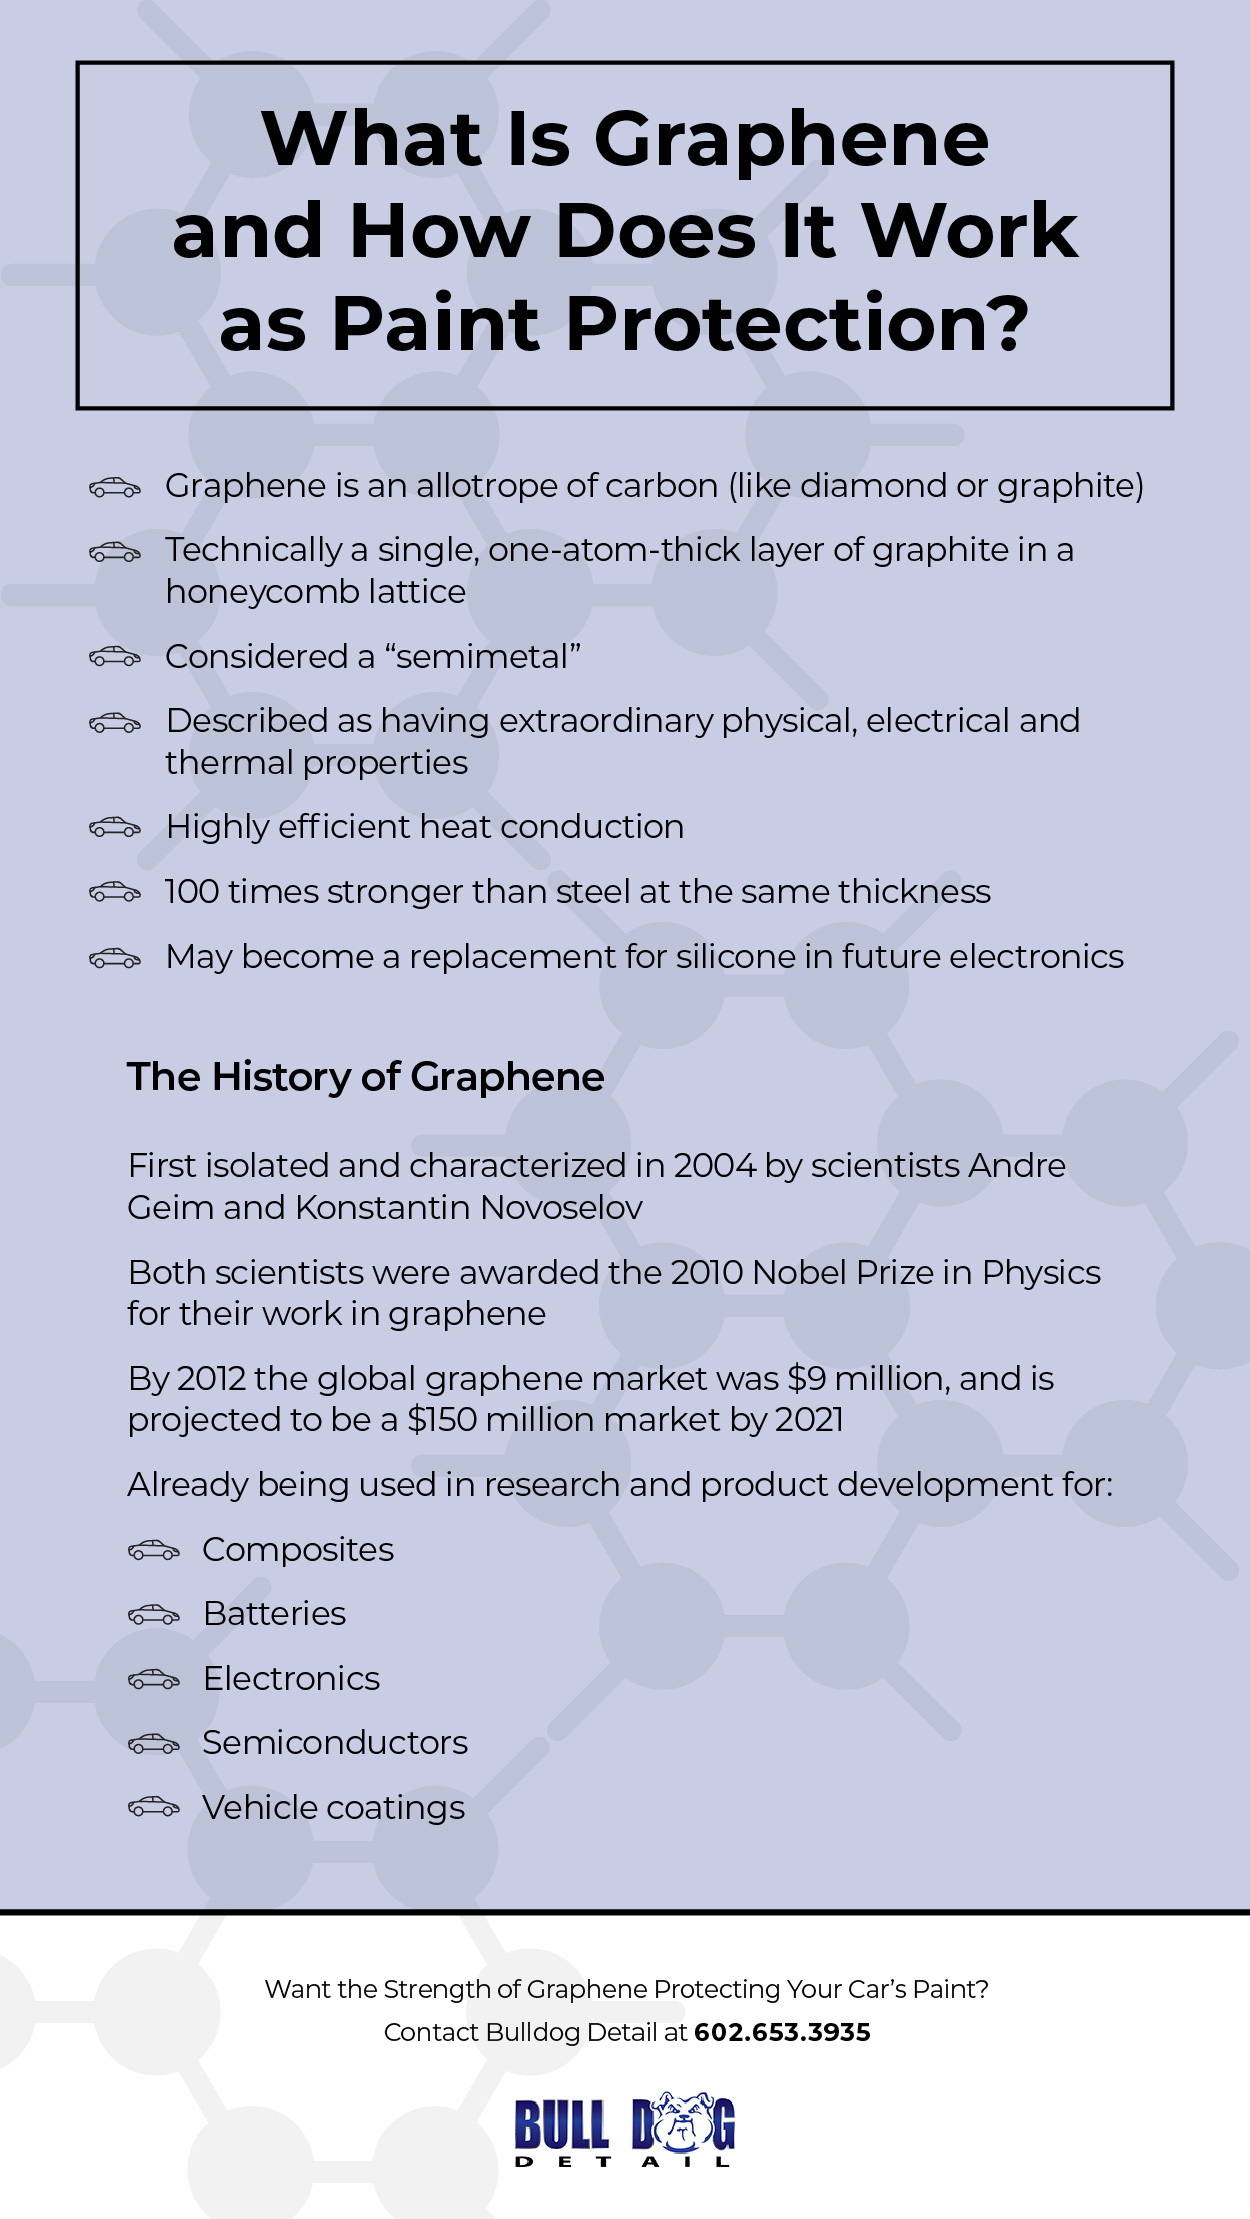 What is graphene paint protection